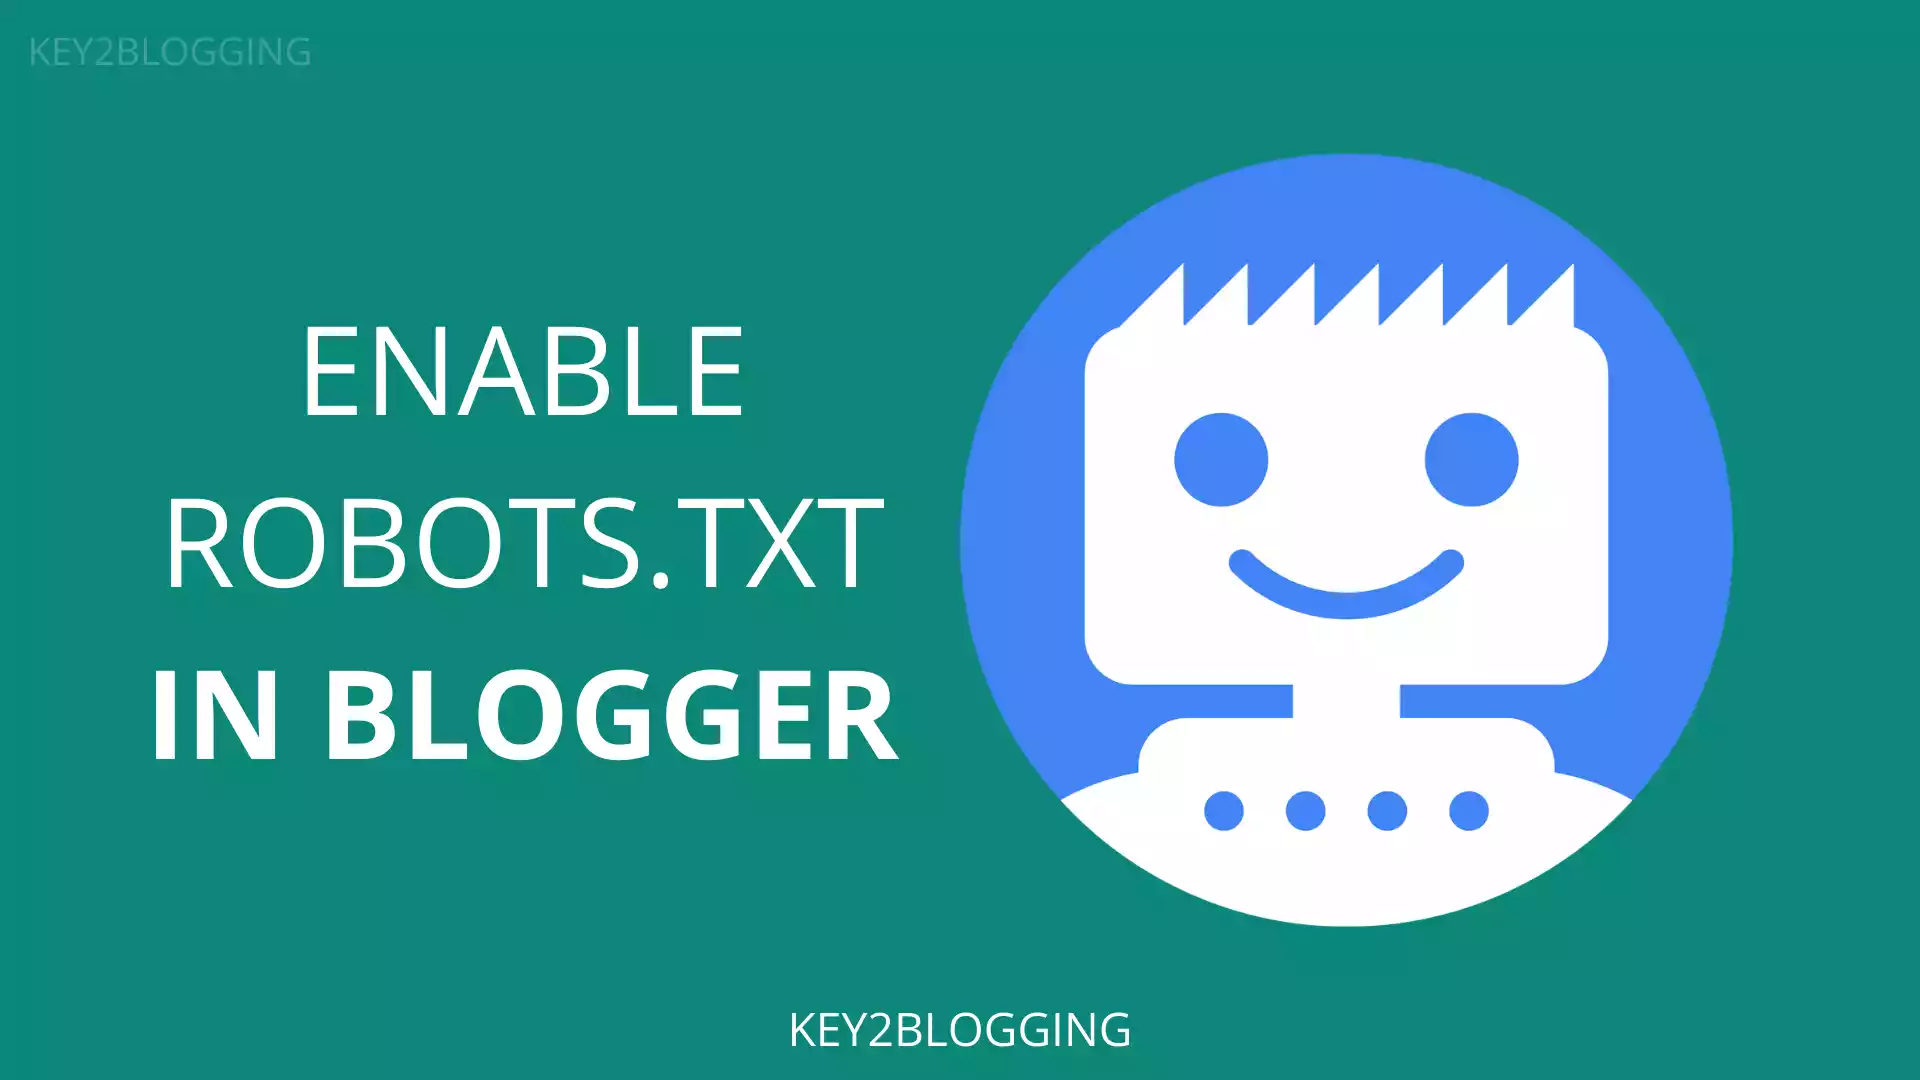 How to enable robots.txt in blogger